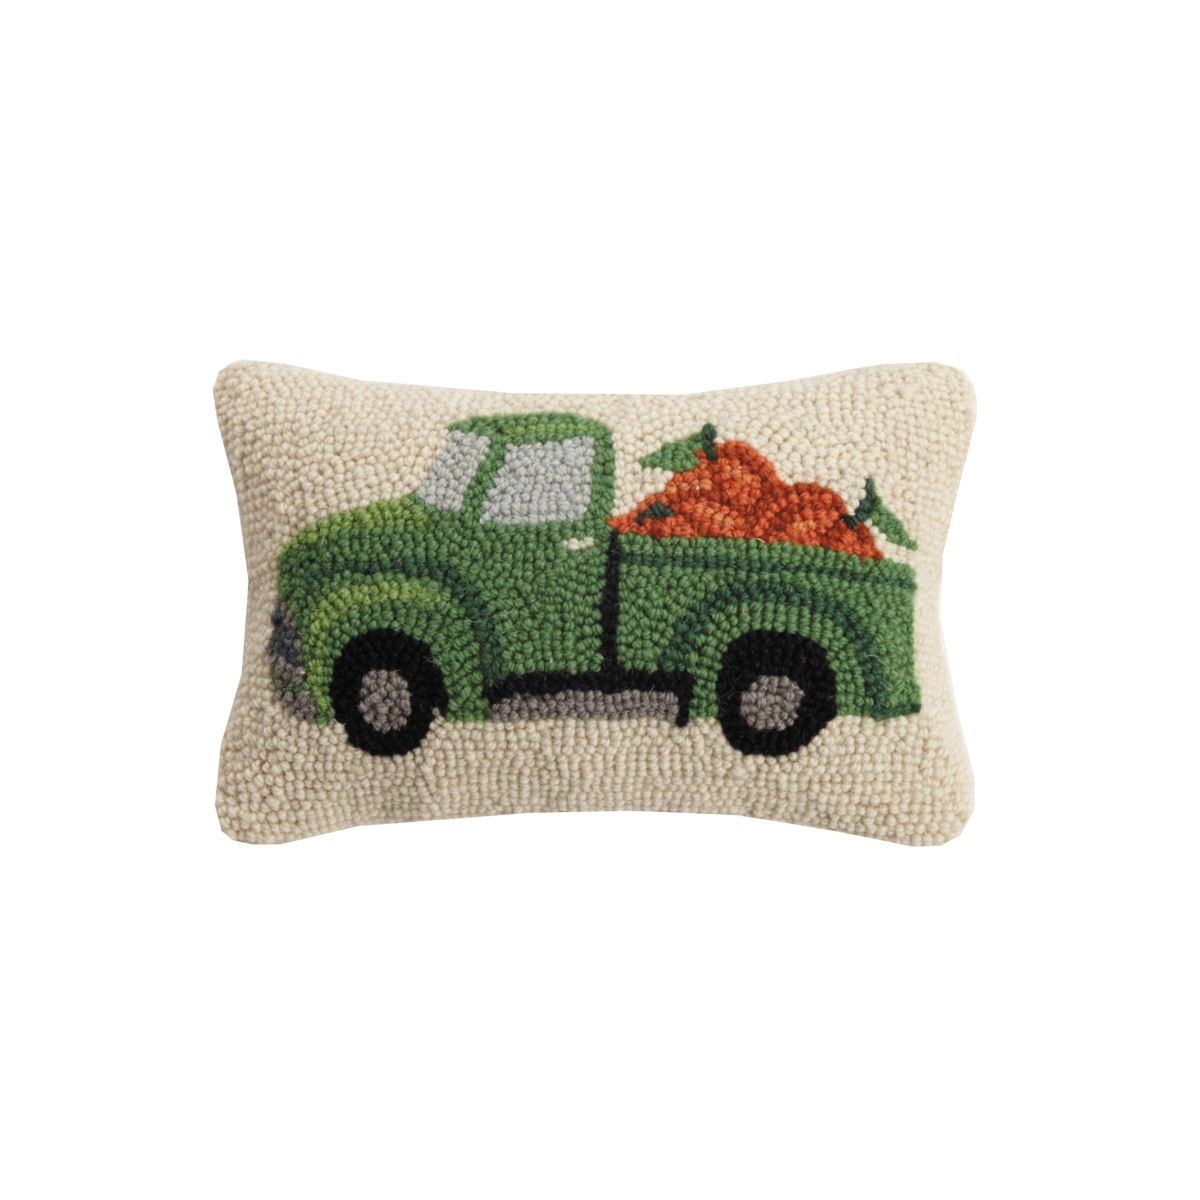 Picture of Peking Handicraft 31SJM6766C12OB 8 x 12 in. Pumpkins Poly Filled Hook Pillow with Fall Truck - Pack of 2